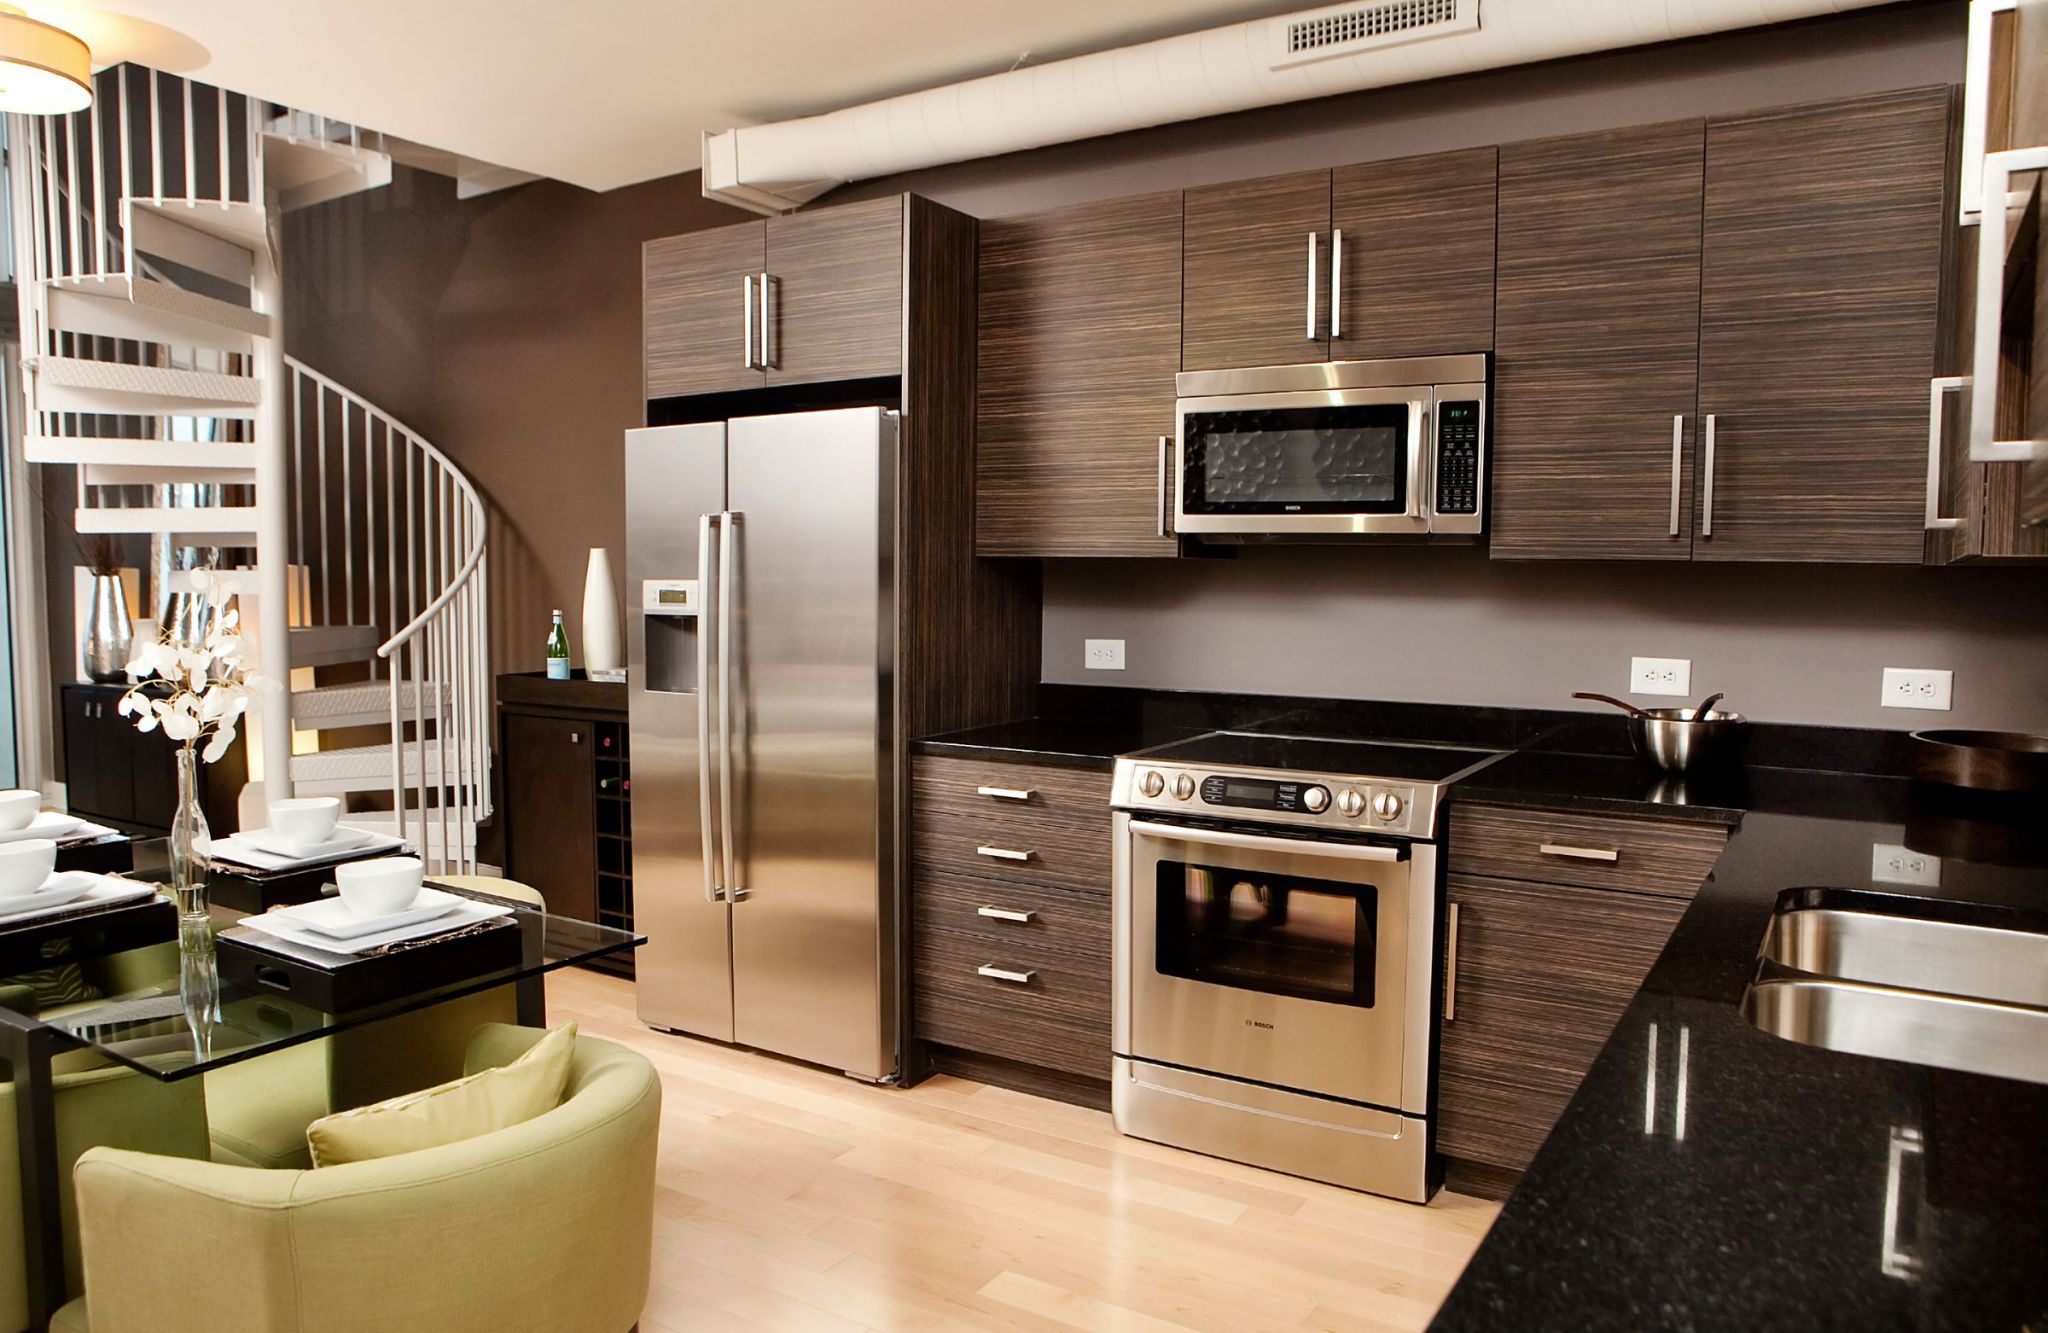 Luxury apartment kitchen with stainless steel appliances, granite countertops, and lots of storage space